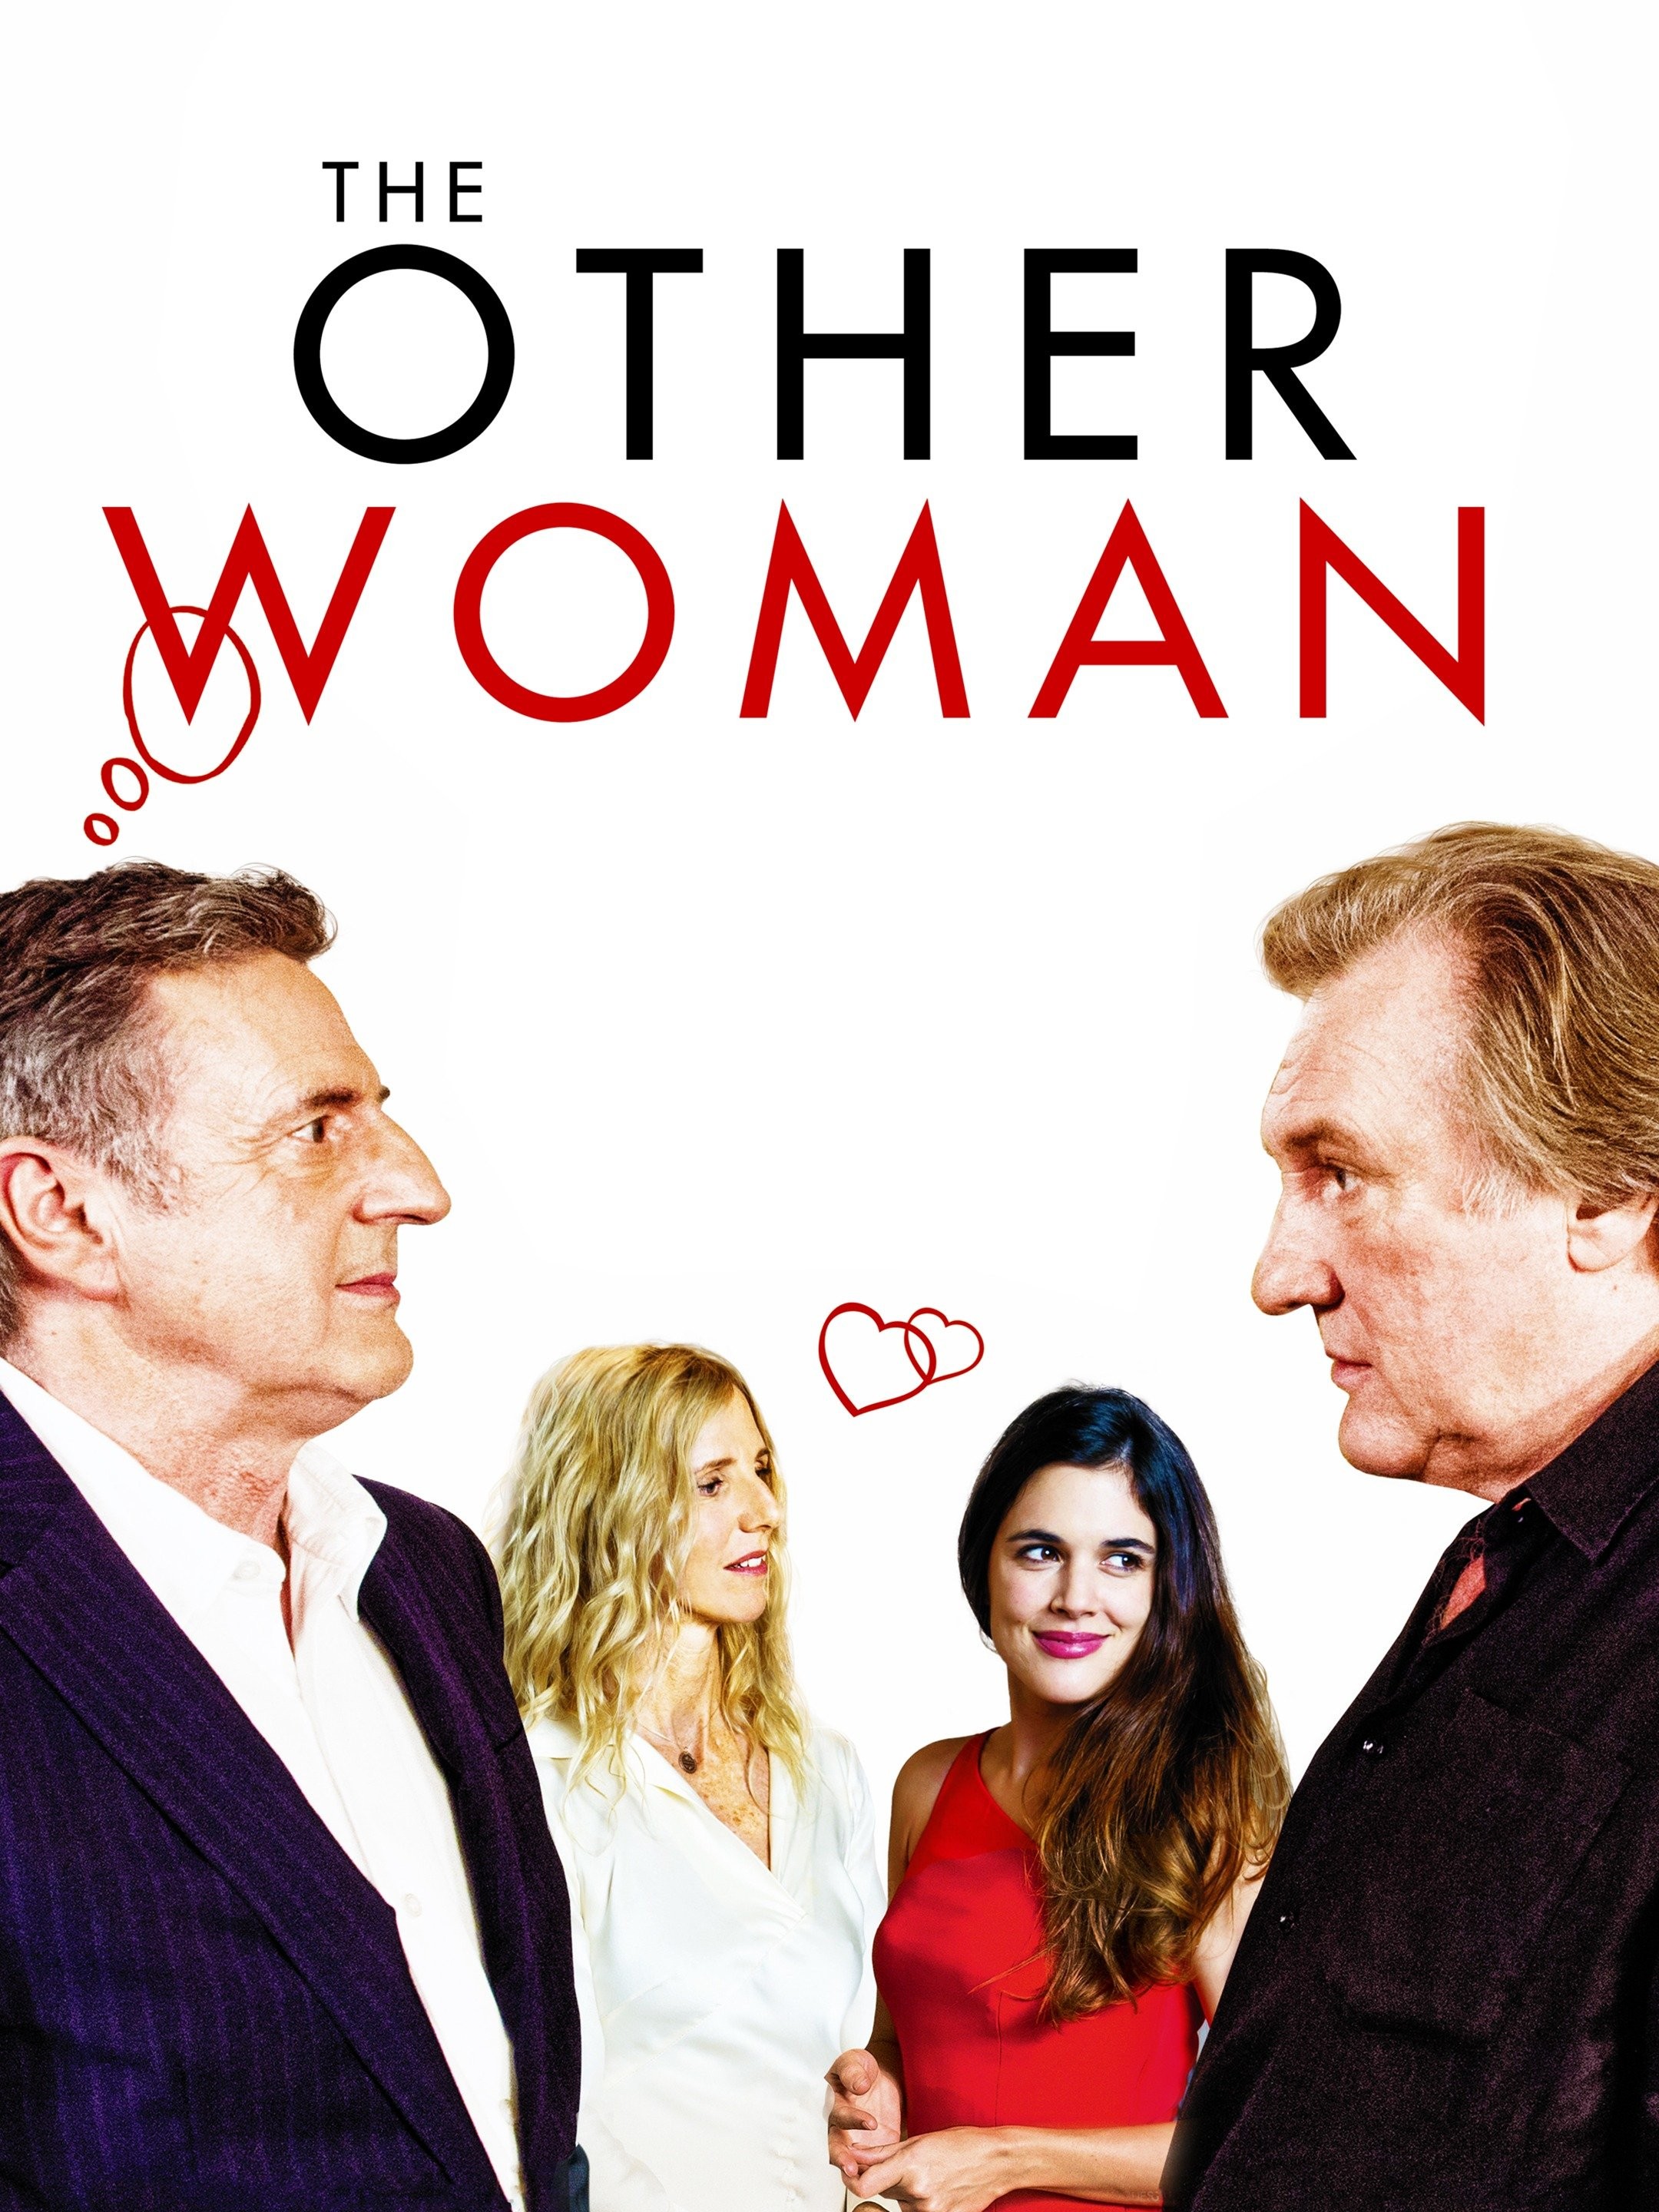 REVIEW: “The Other Woman”